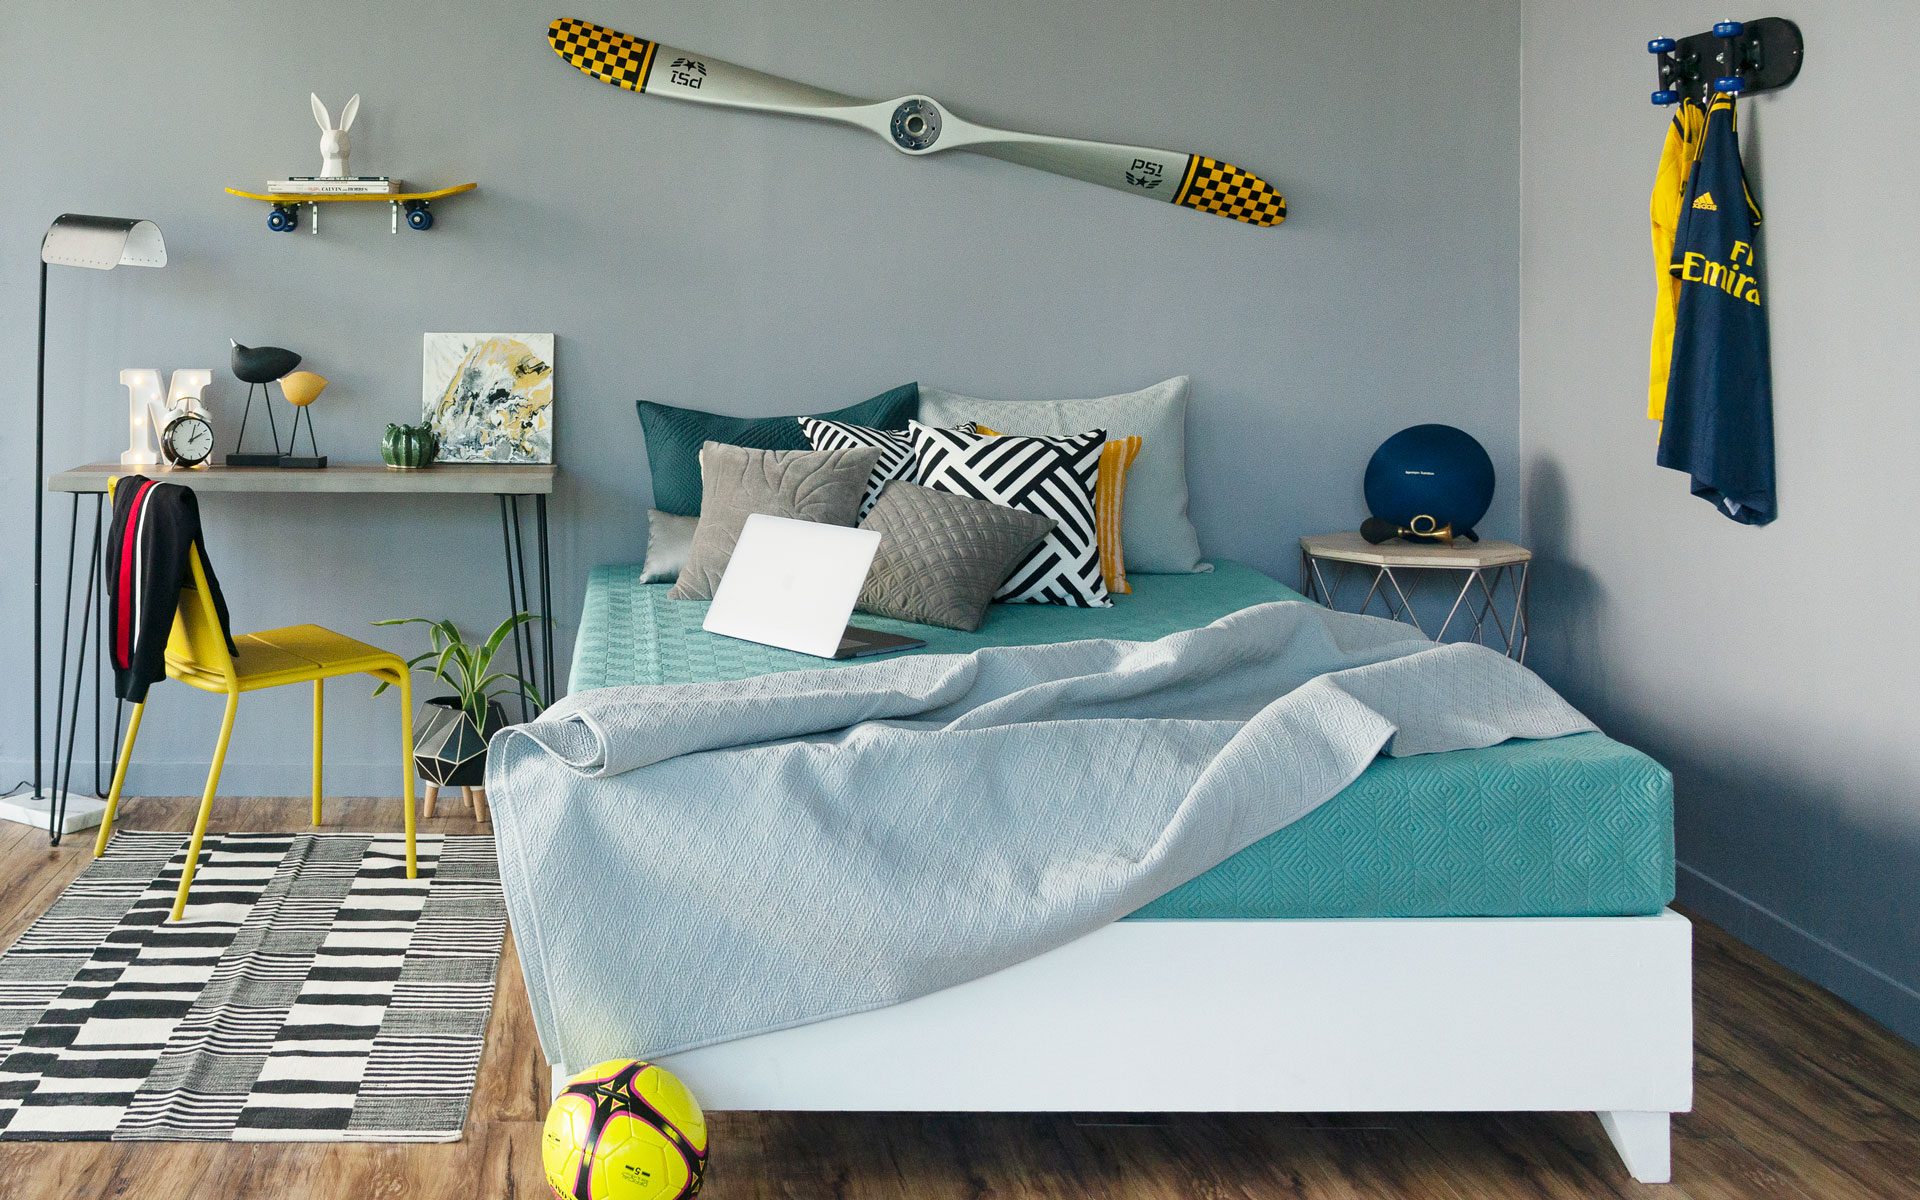 Male young adult bedroom with blue and grey tones